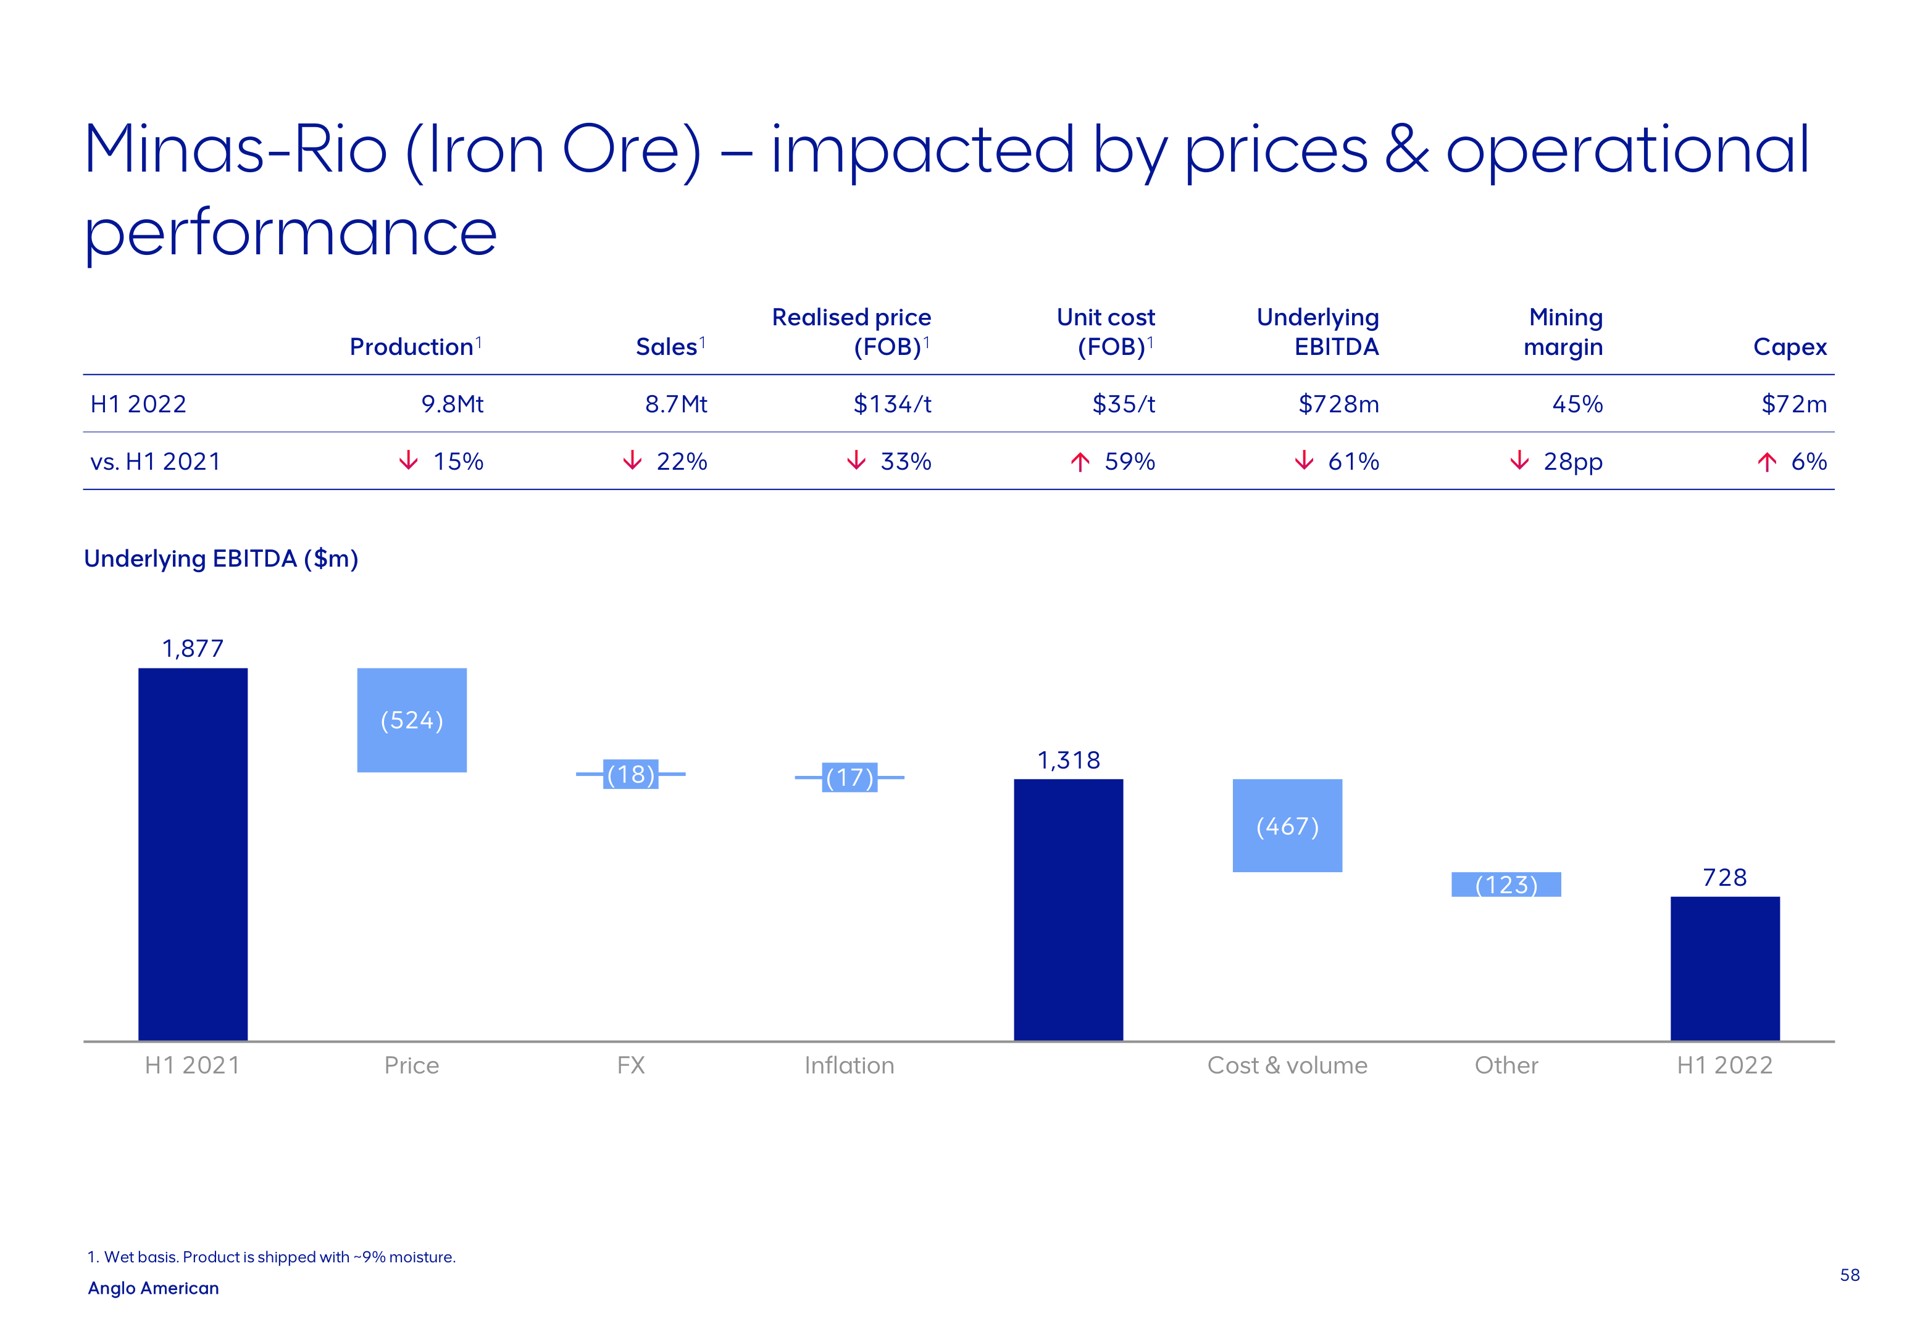 minas rio iron ore impacted by prices operational performance production sales price fob unit cost fob underlying mining margin underlying price inflation cost volume other wet basis product is shipped with moisture | AngloAmerican